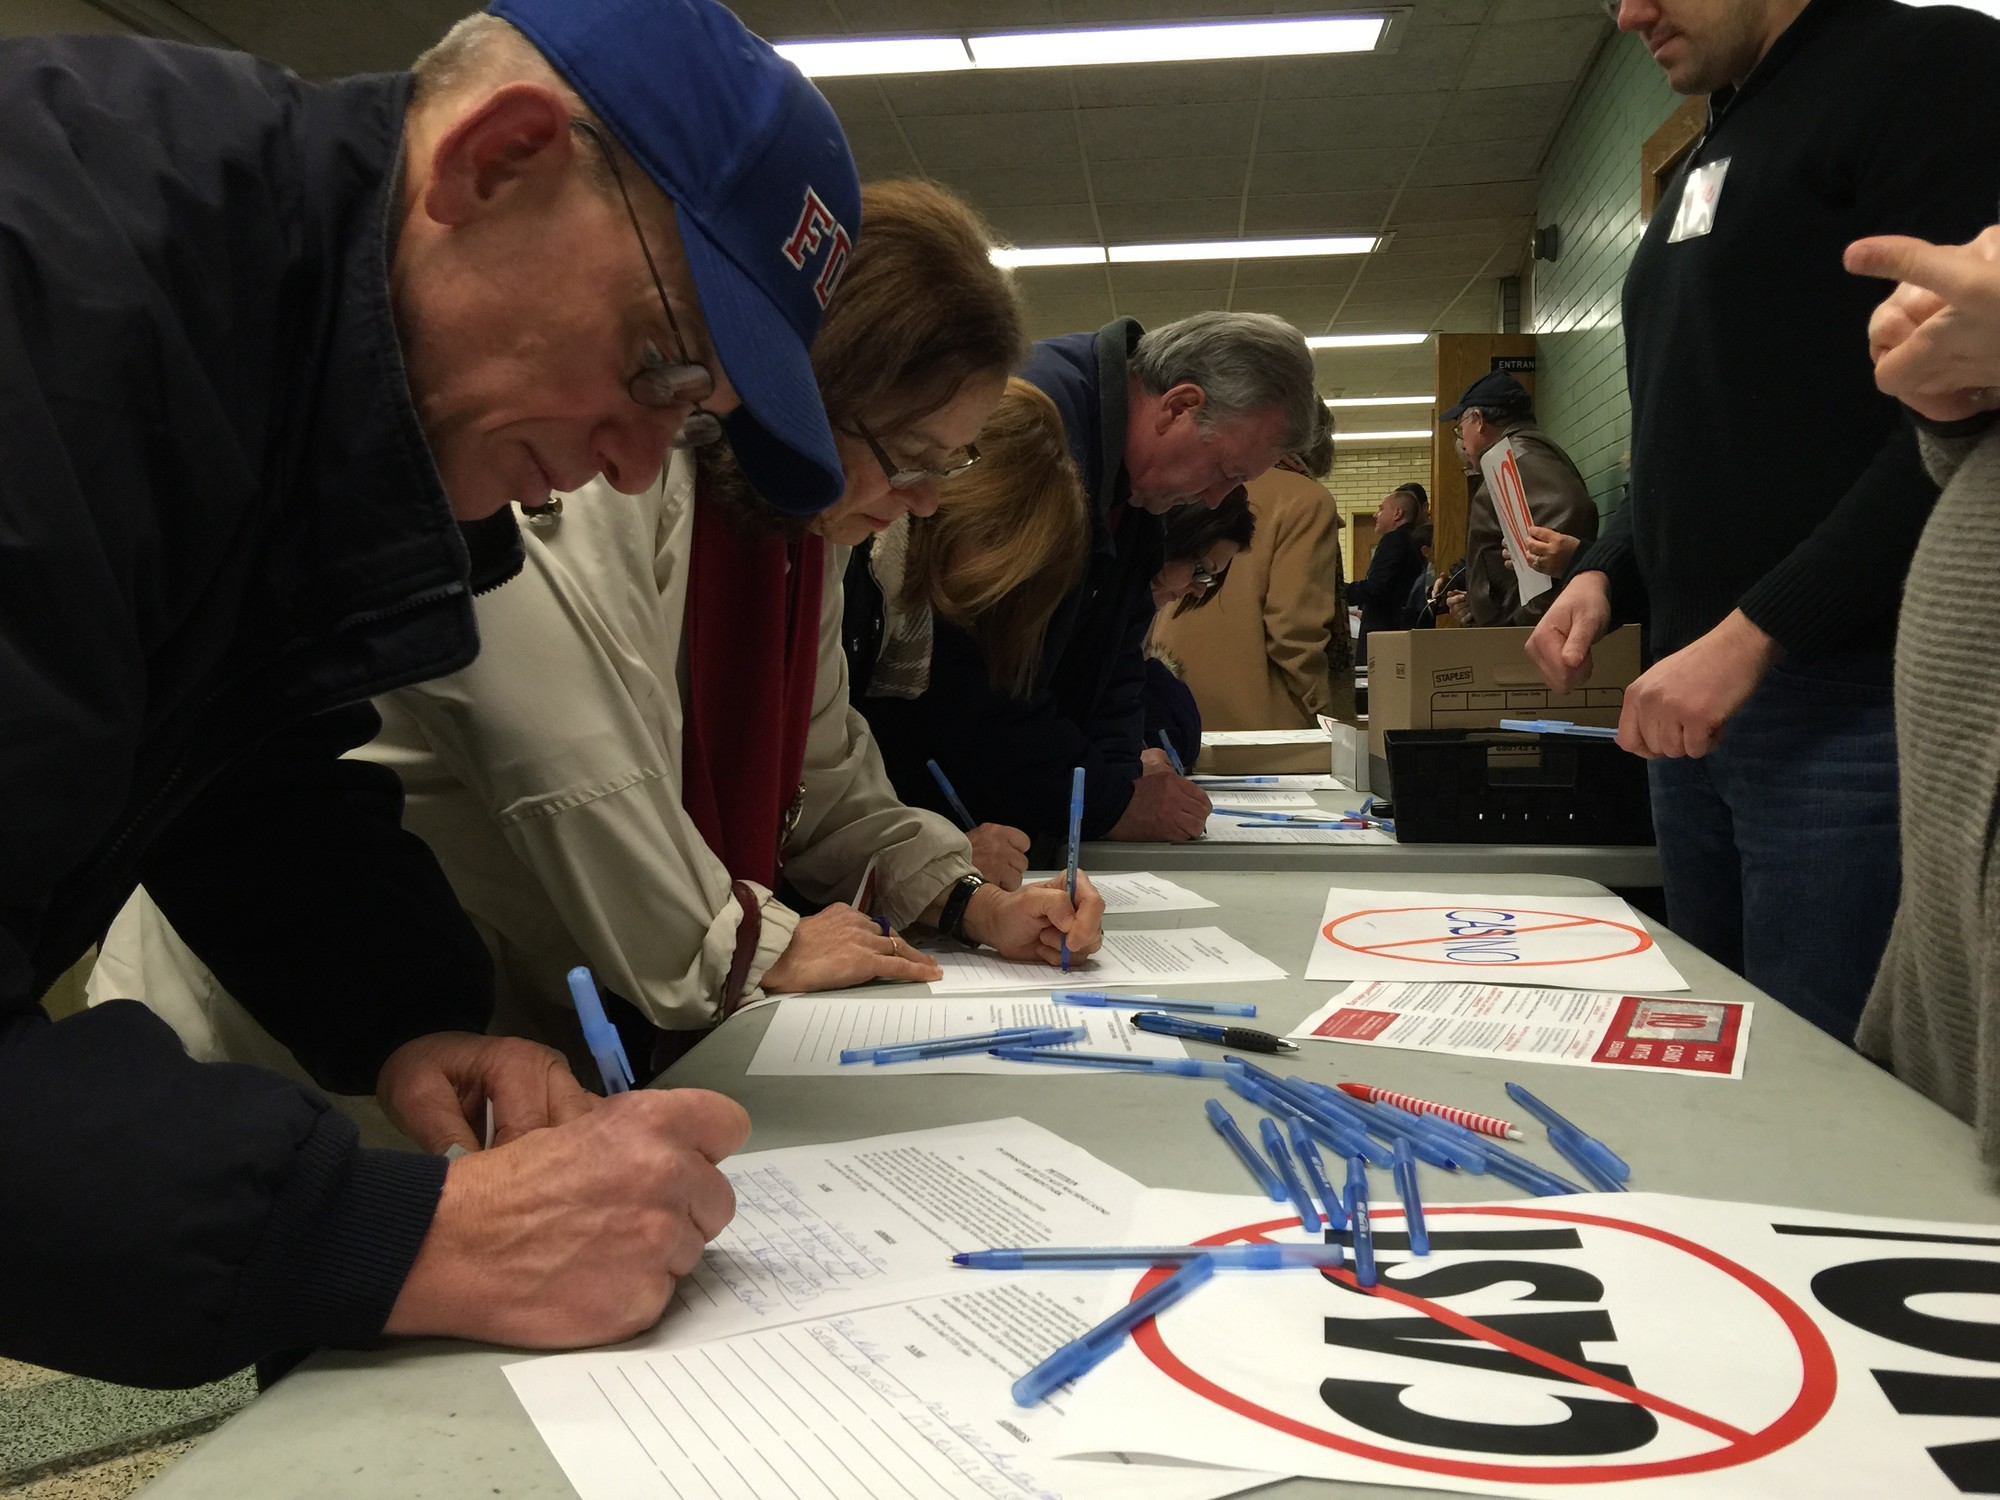 More than 2,000 people signed a petition opposing the VLT facility.